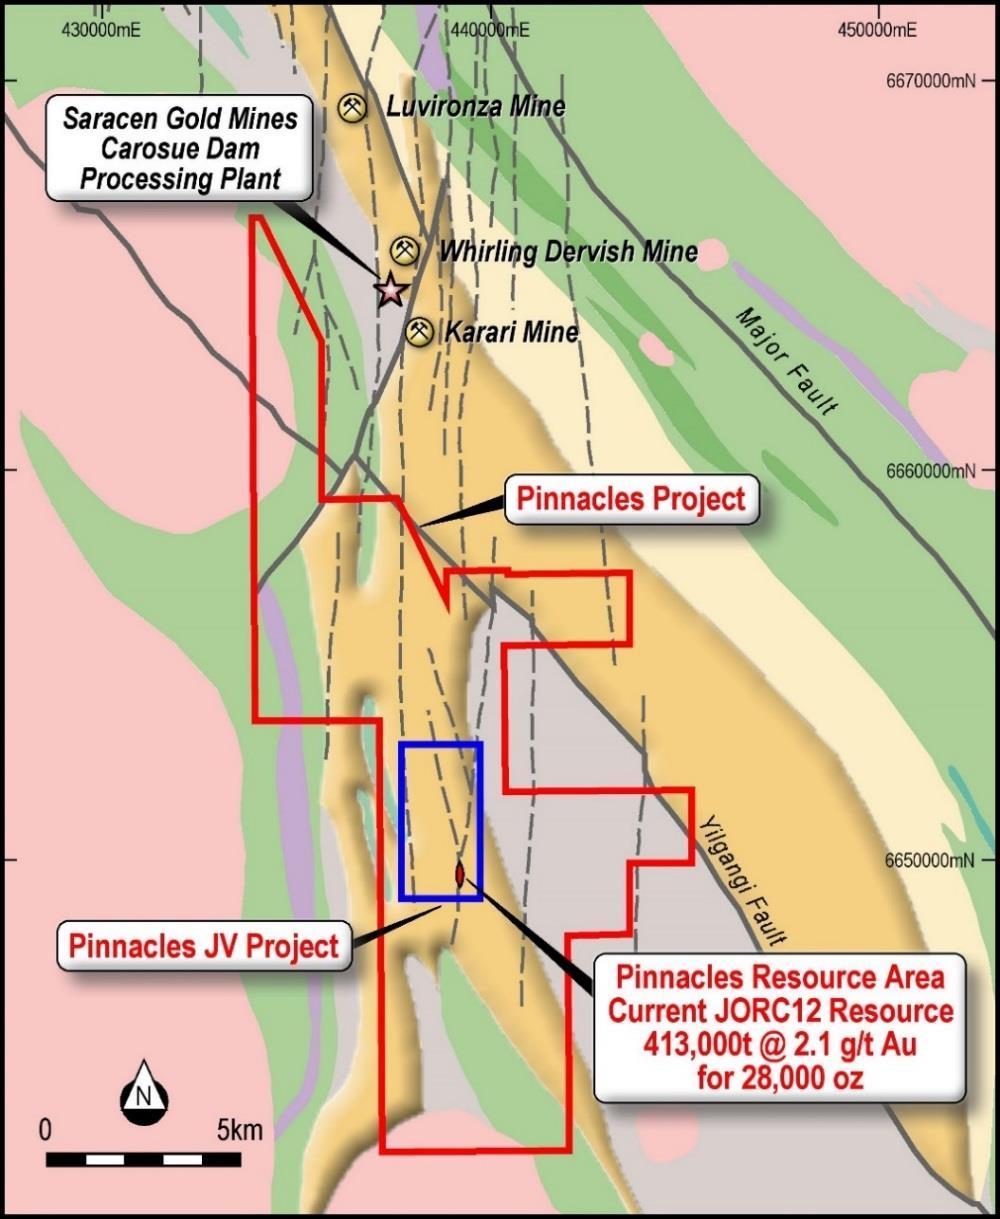 Pinnacles Regional Project The Pinnacles Project tenements cover approximately 100km 2.